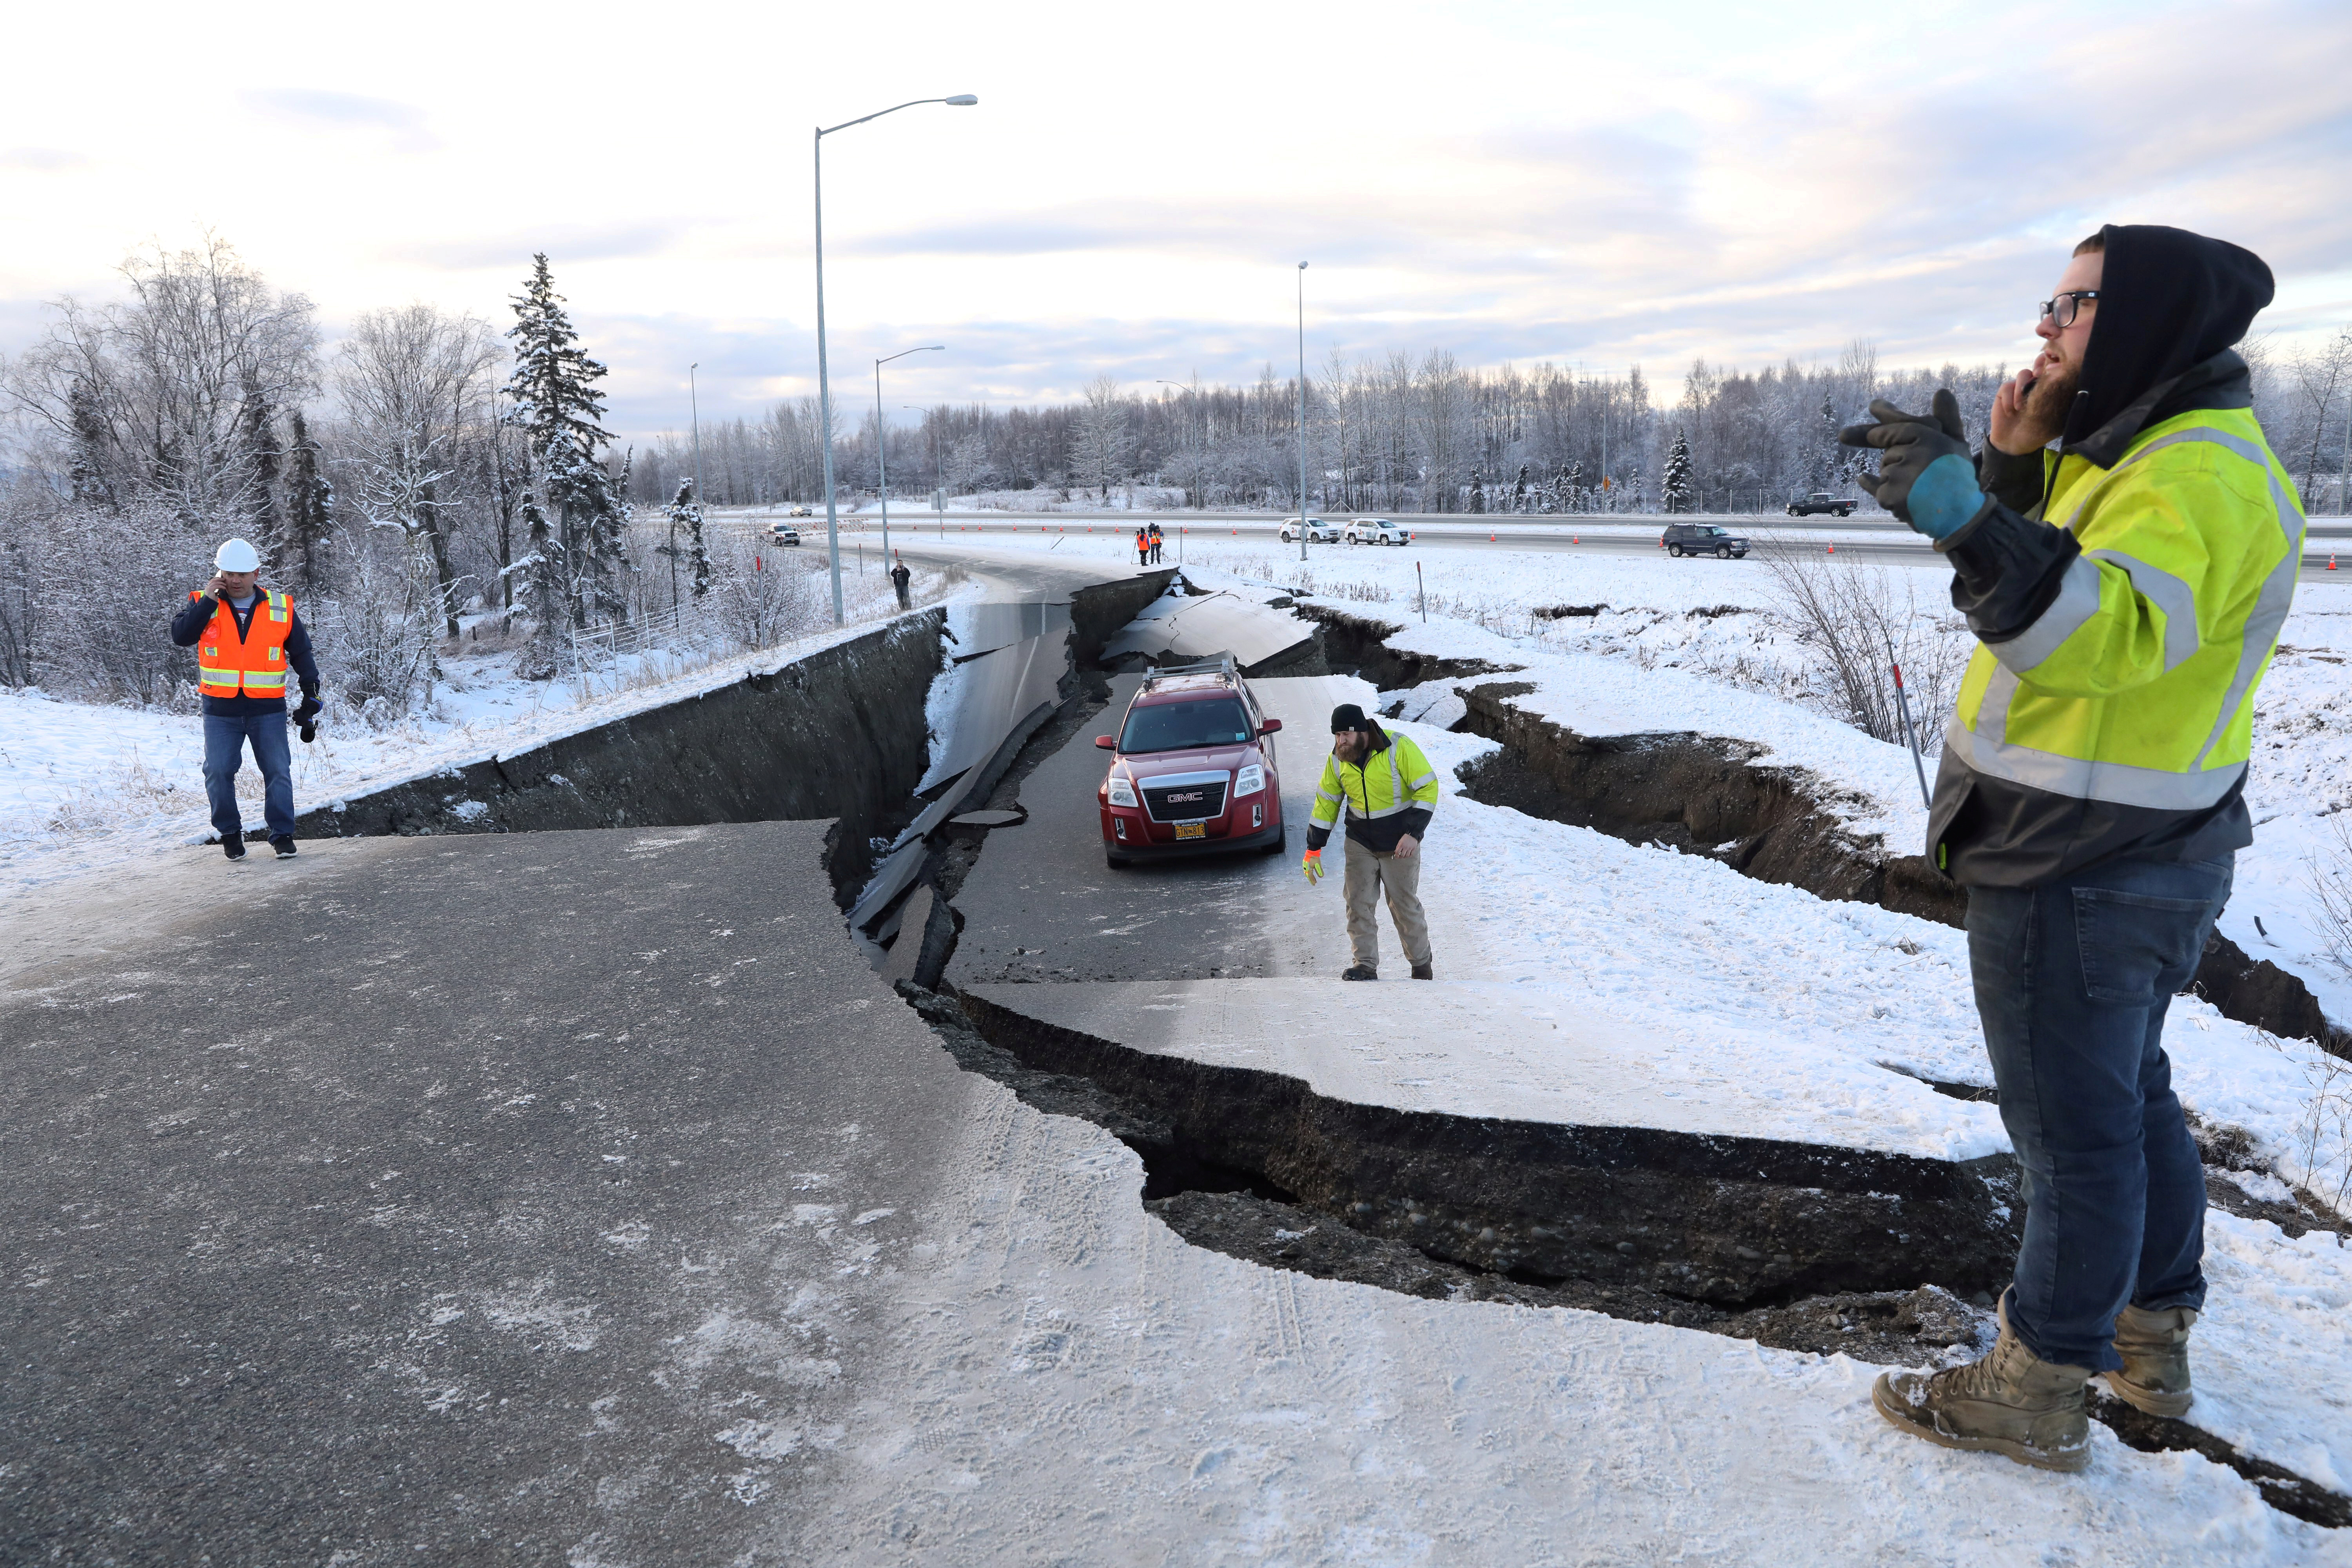 A stranded vehicle lies on a collapsed roadway near the airport after an earthquake in Anchorage, Alaska, U.S. November 30, 2018. REUTERS/Nathaniel Wilder